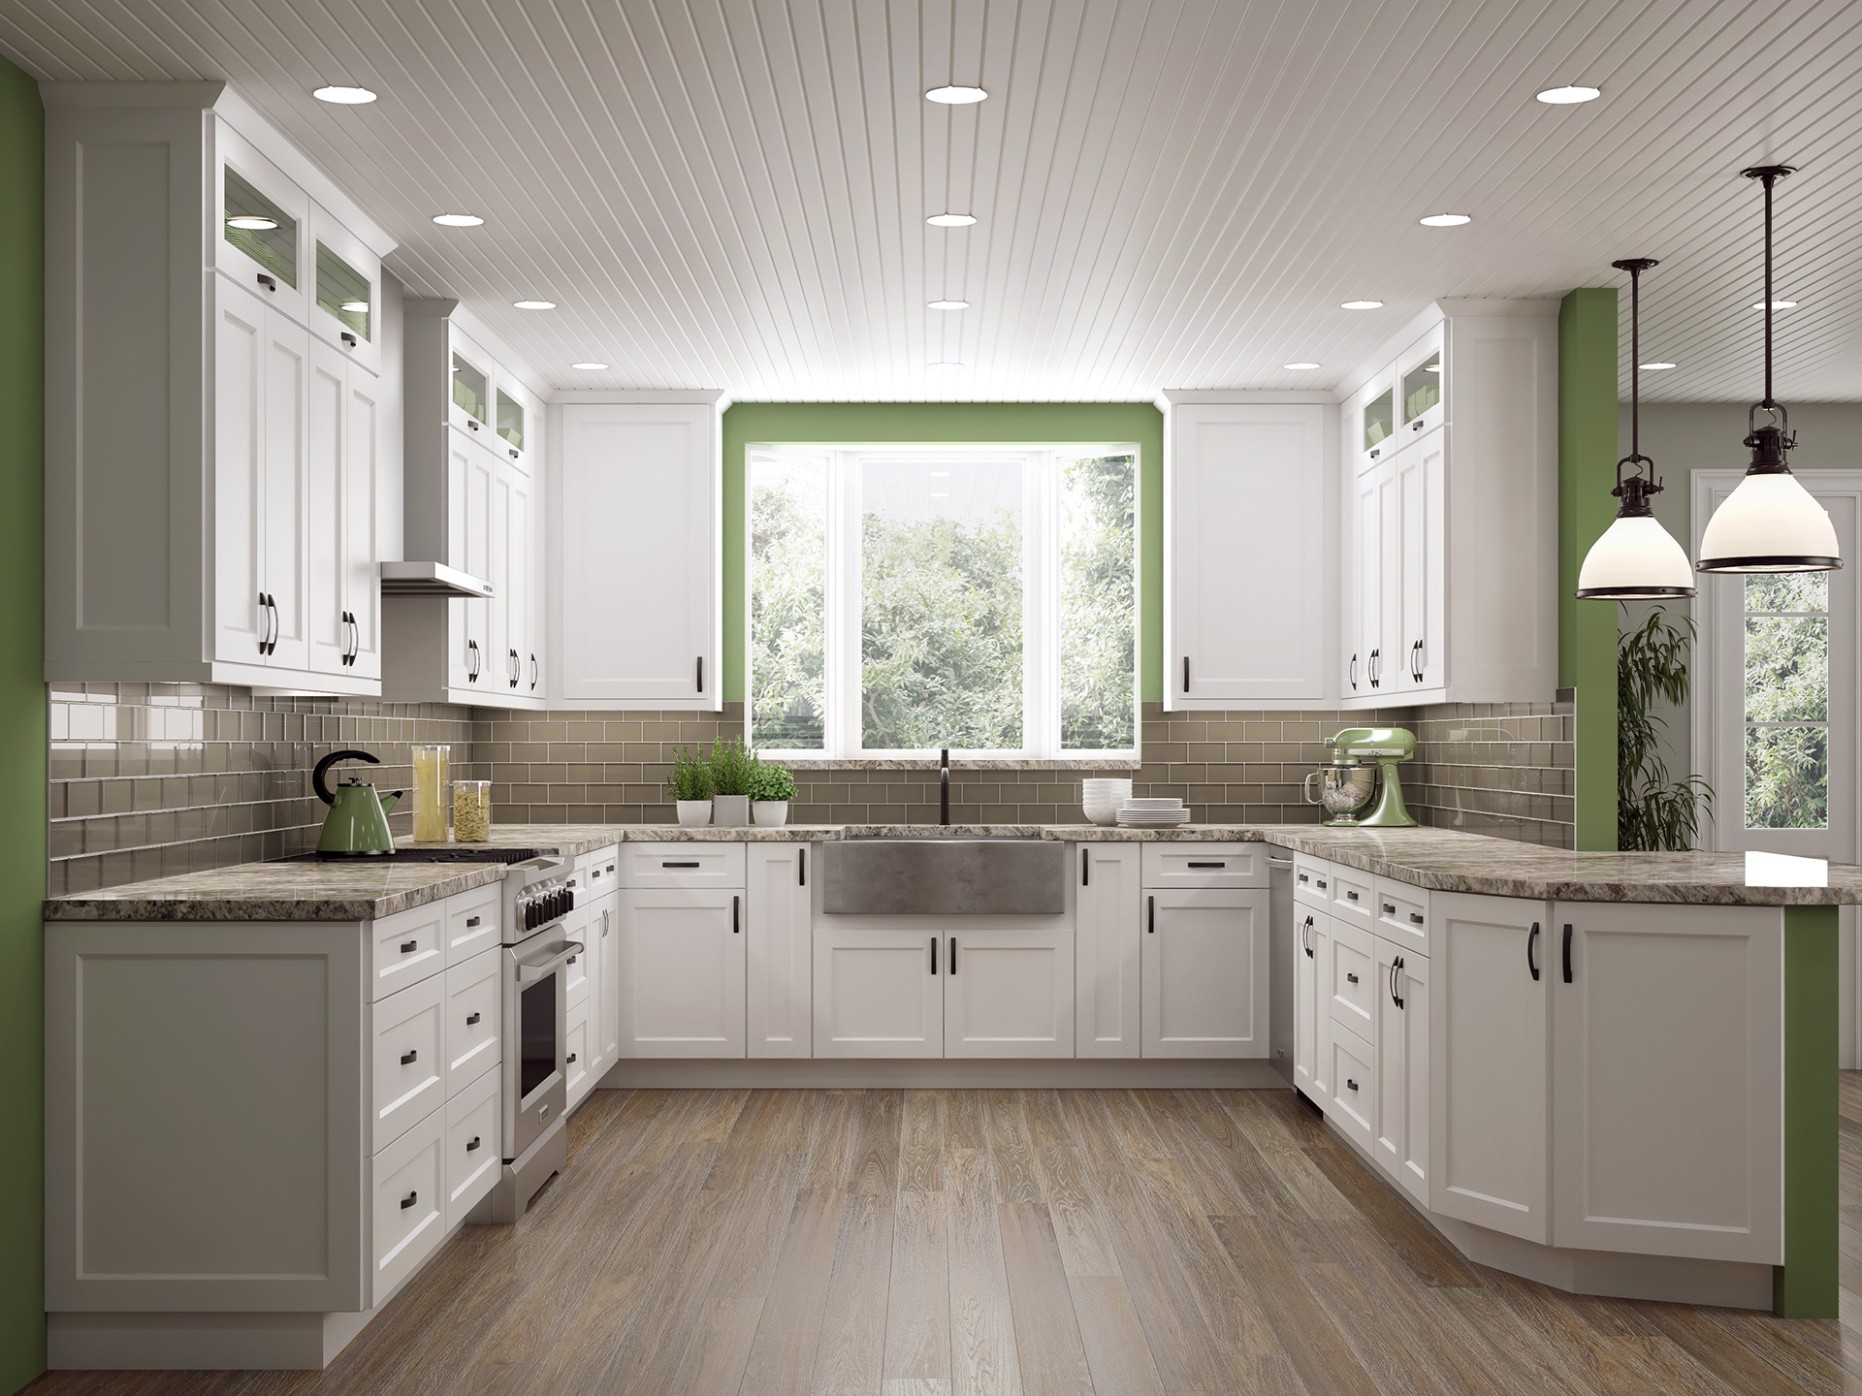 5x5 Kitchens - 5 Foot Run Kitchen Cabinets  CabinetCorp - what is a 10x10 kitchen?